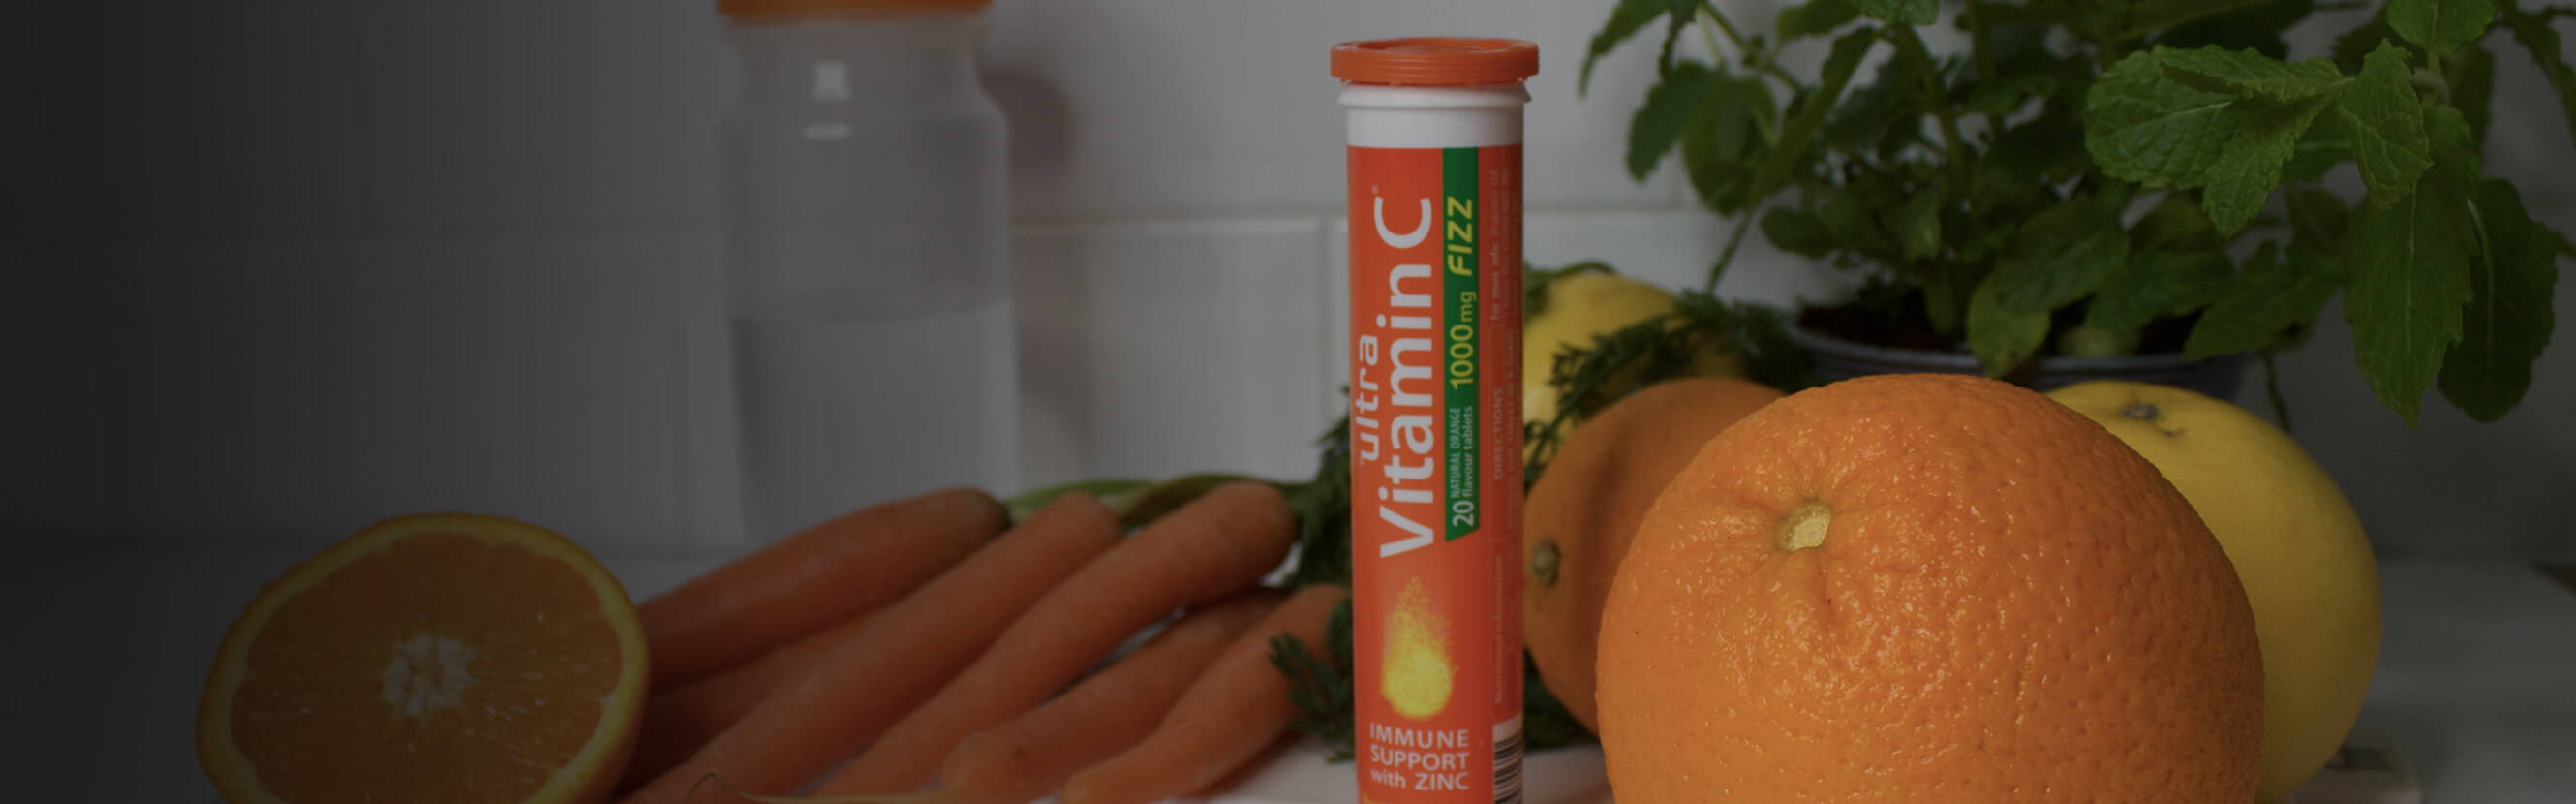  Post-exercise, on-the-go or just as part of your morning routine, Ultra Vitamin C Fizz is a quick-and-easy way to safeguard your diet. Just add water and drink in some extra nutrition with Vitamin C and Zinc which contribute to the normal functioning of the immune system. 